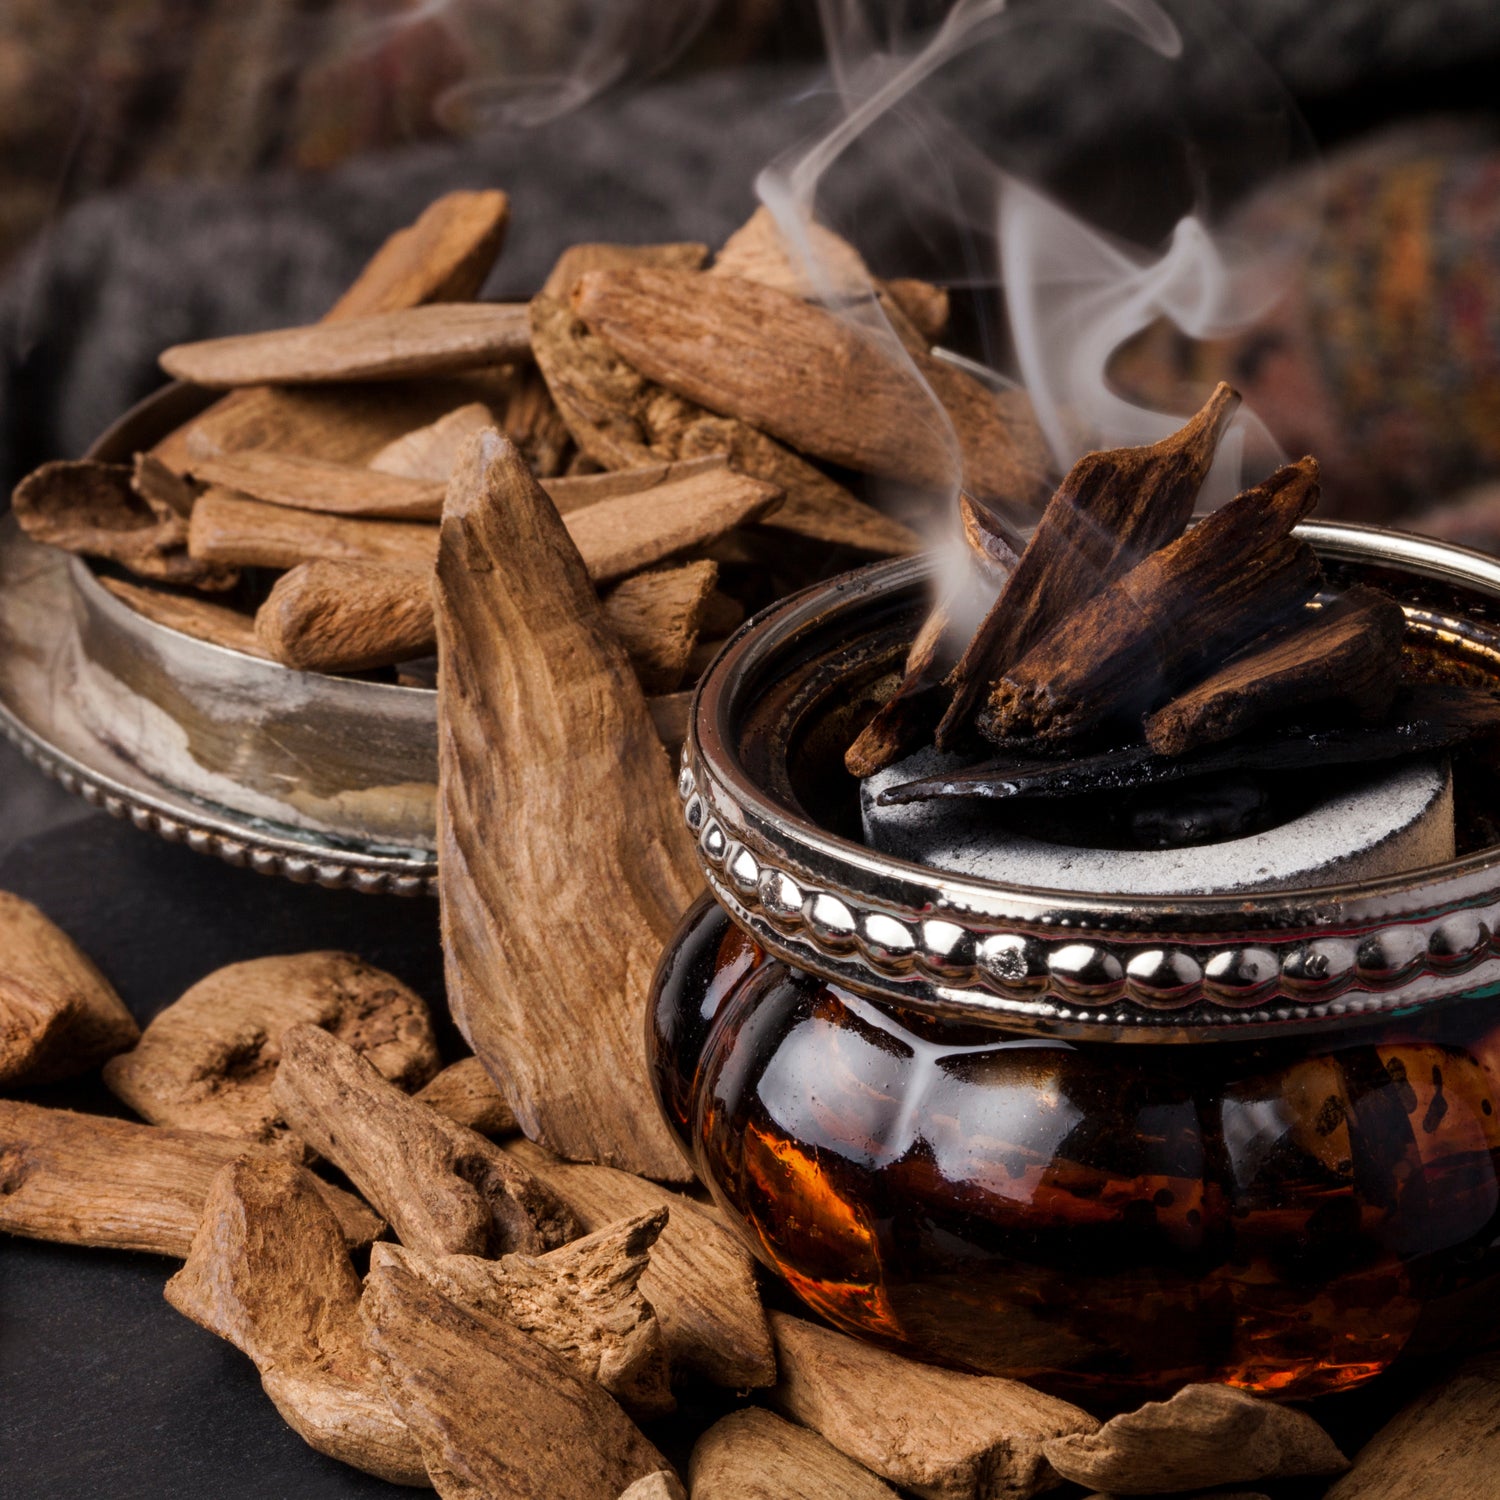 A photo of some of the components of the masculine incense fragrance notes in the "Amber Oud" scented candle from Tuscany candle